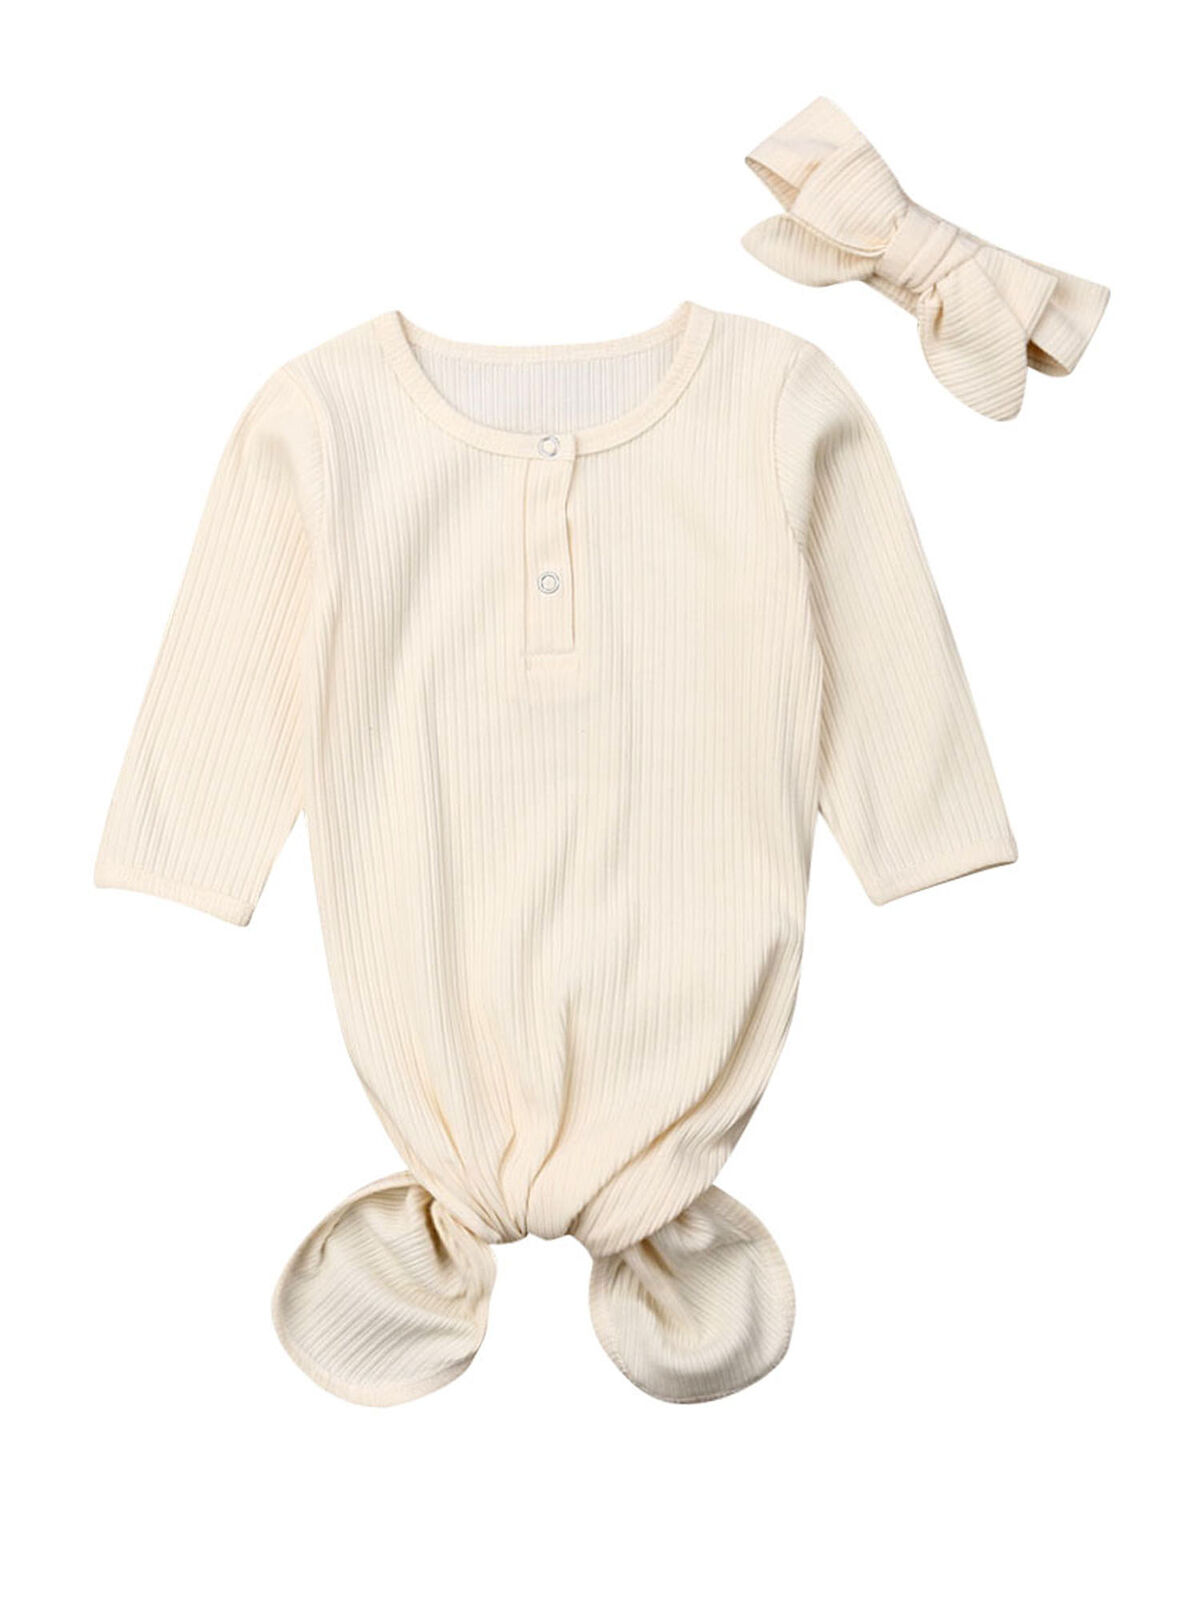 Knotted Sleeper Tie Bottom Sleeper Coming Home Outfit Newborn Gown Girl Outfit Blush Pink Stripe Knotted Baby Layette Gown